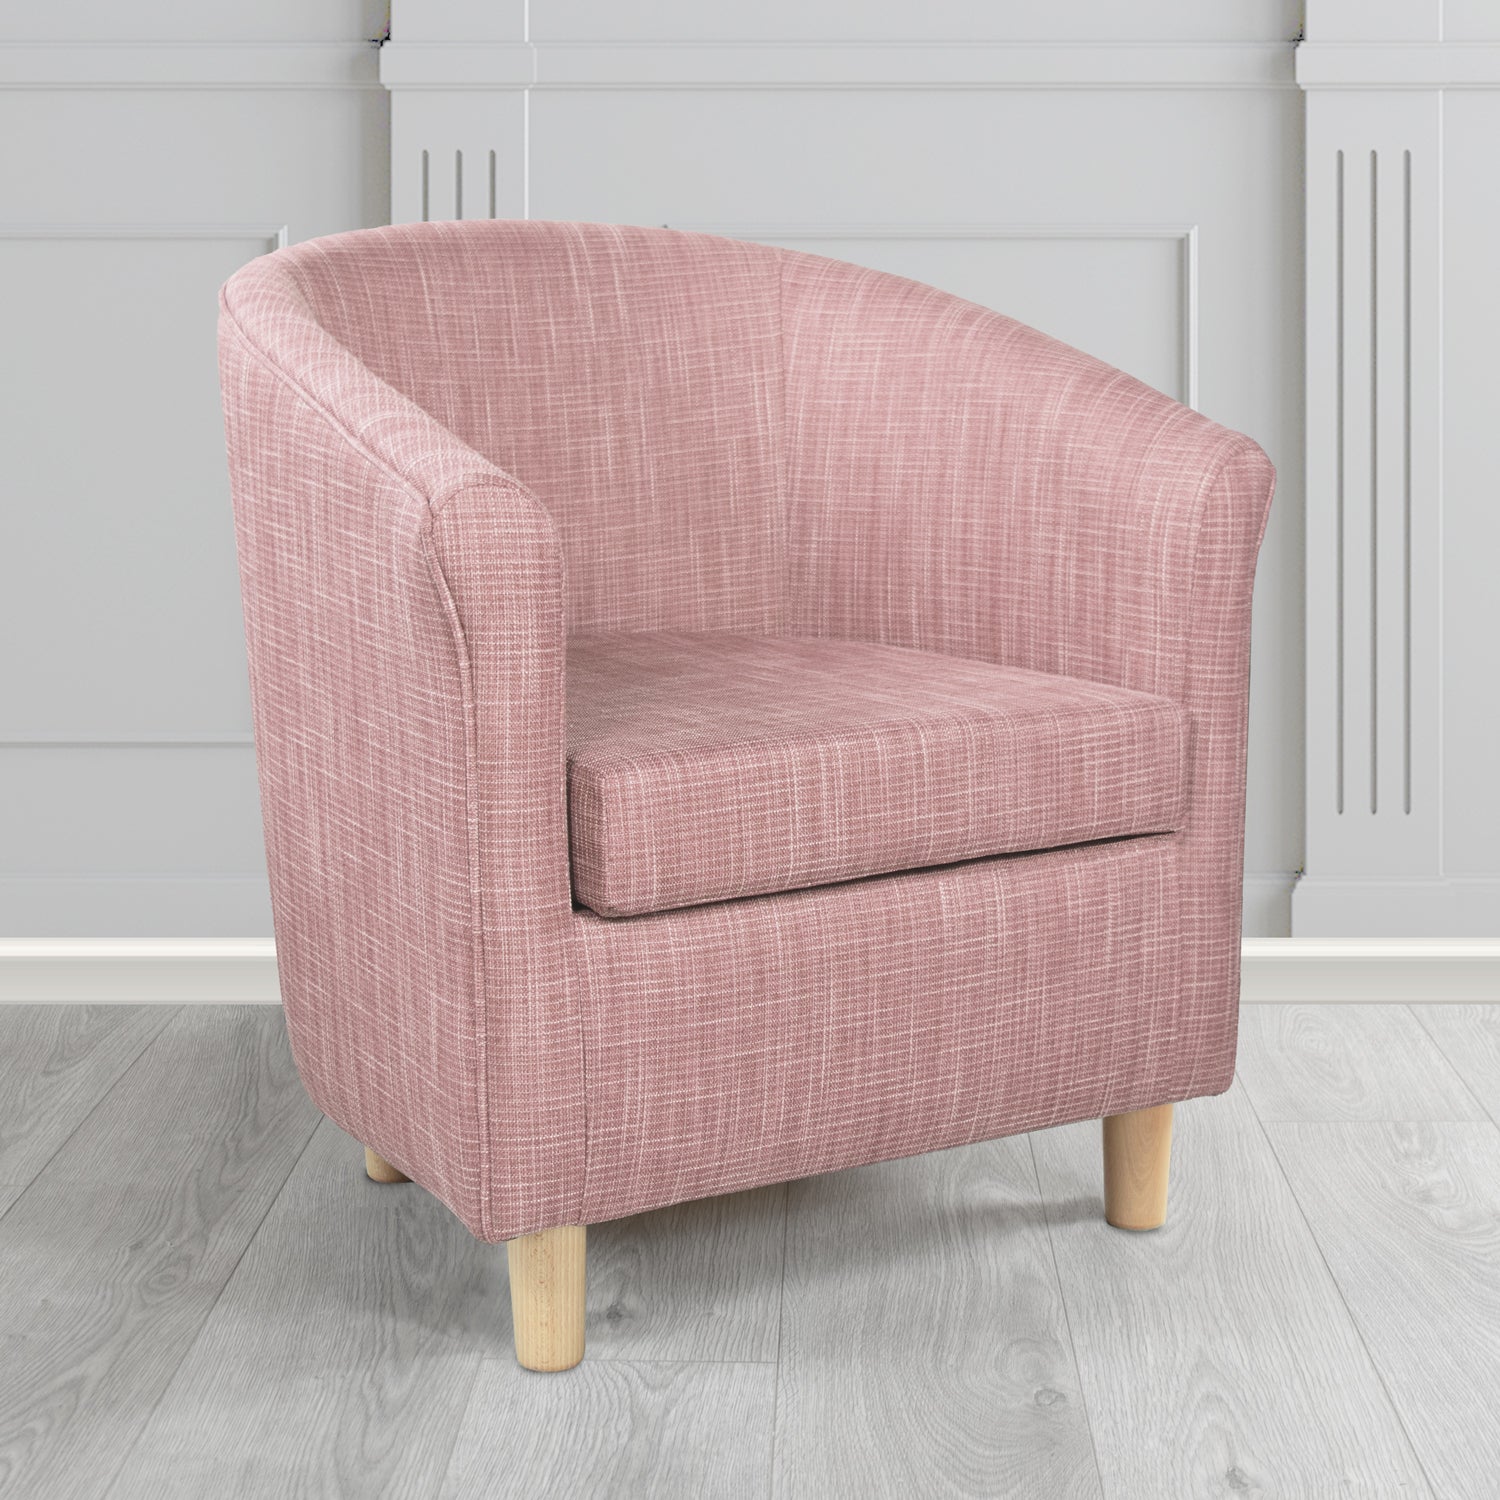 Tuscany Ravel Babe Contract Crib 5 Fabric Tub Chair - Antimicrobial & Water-Resistant - The Tub Chair Shop